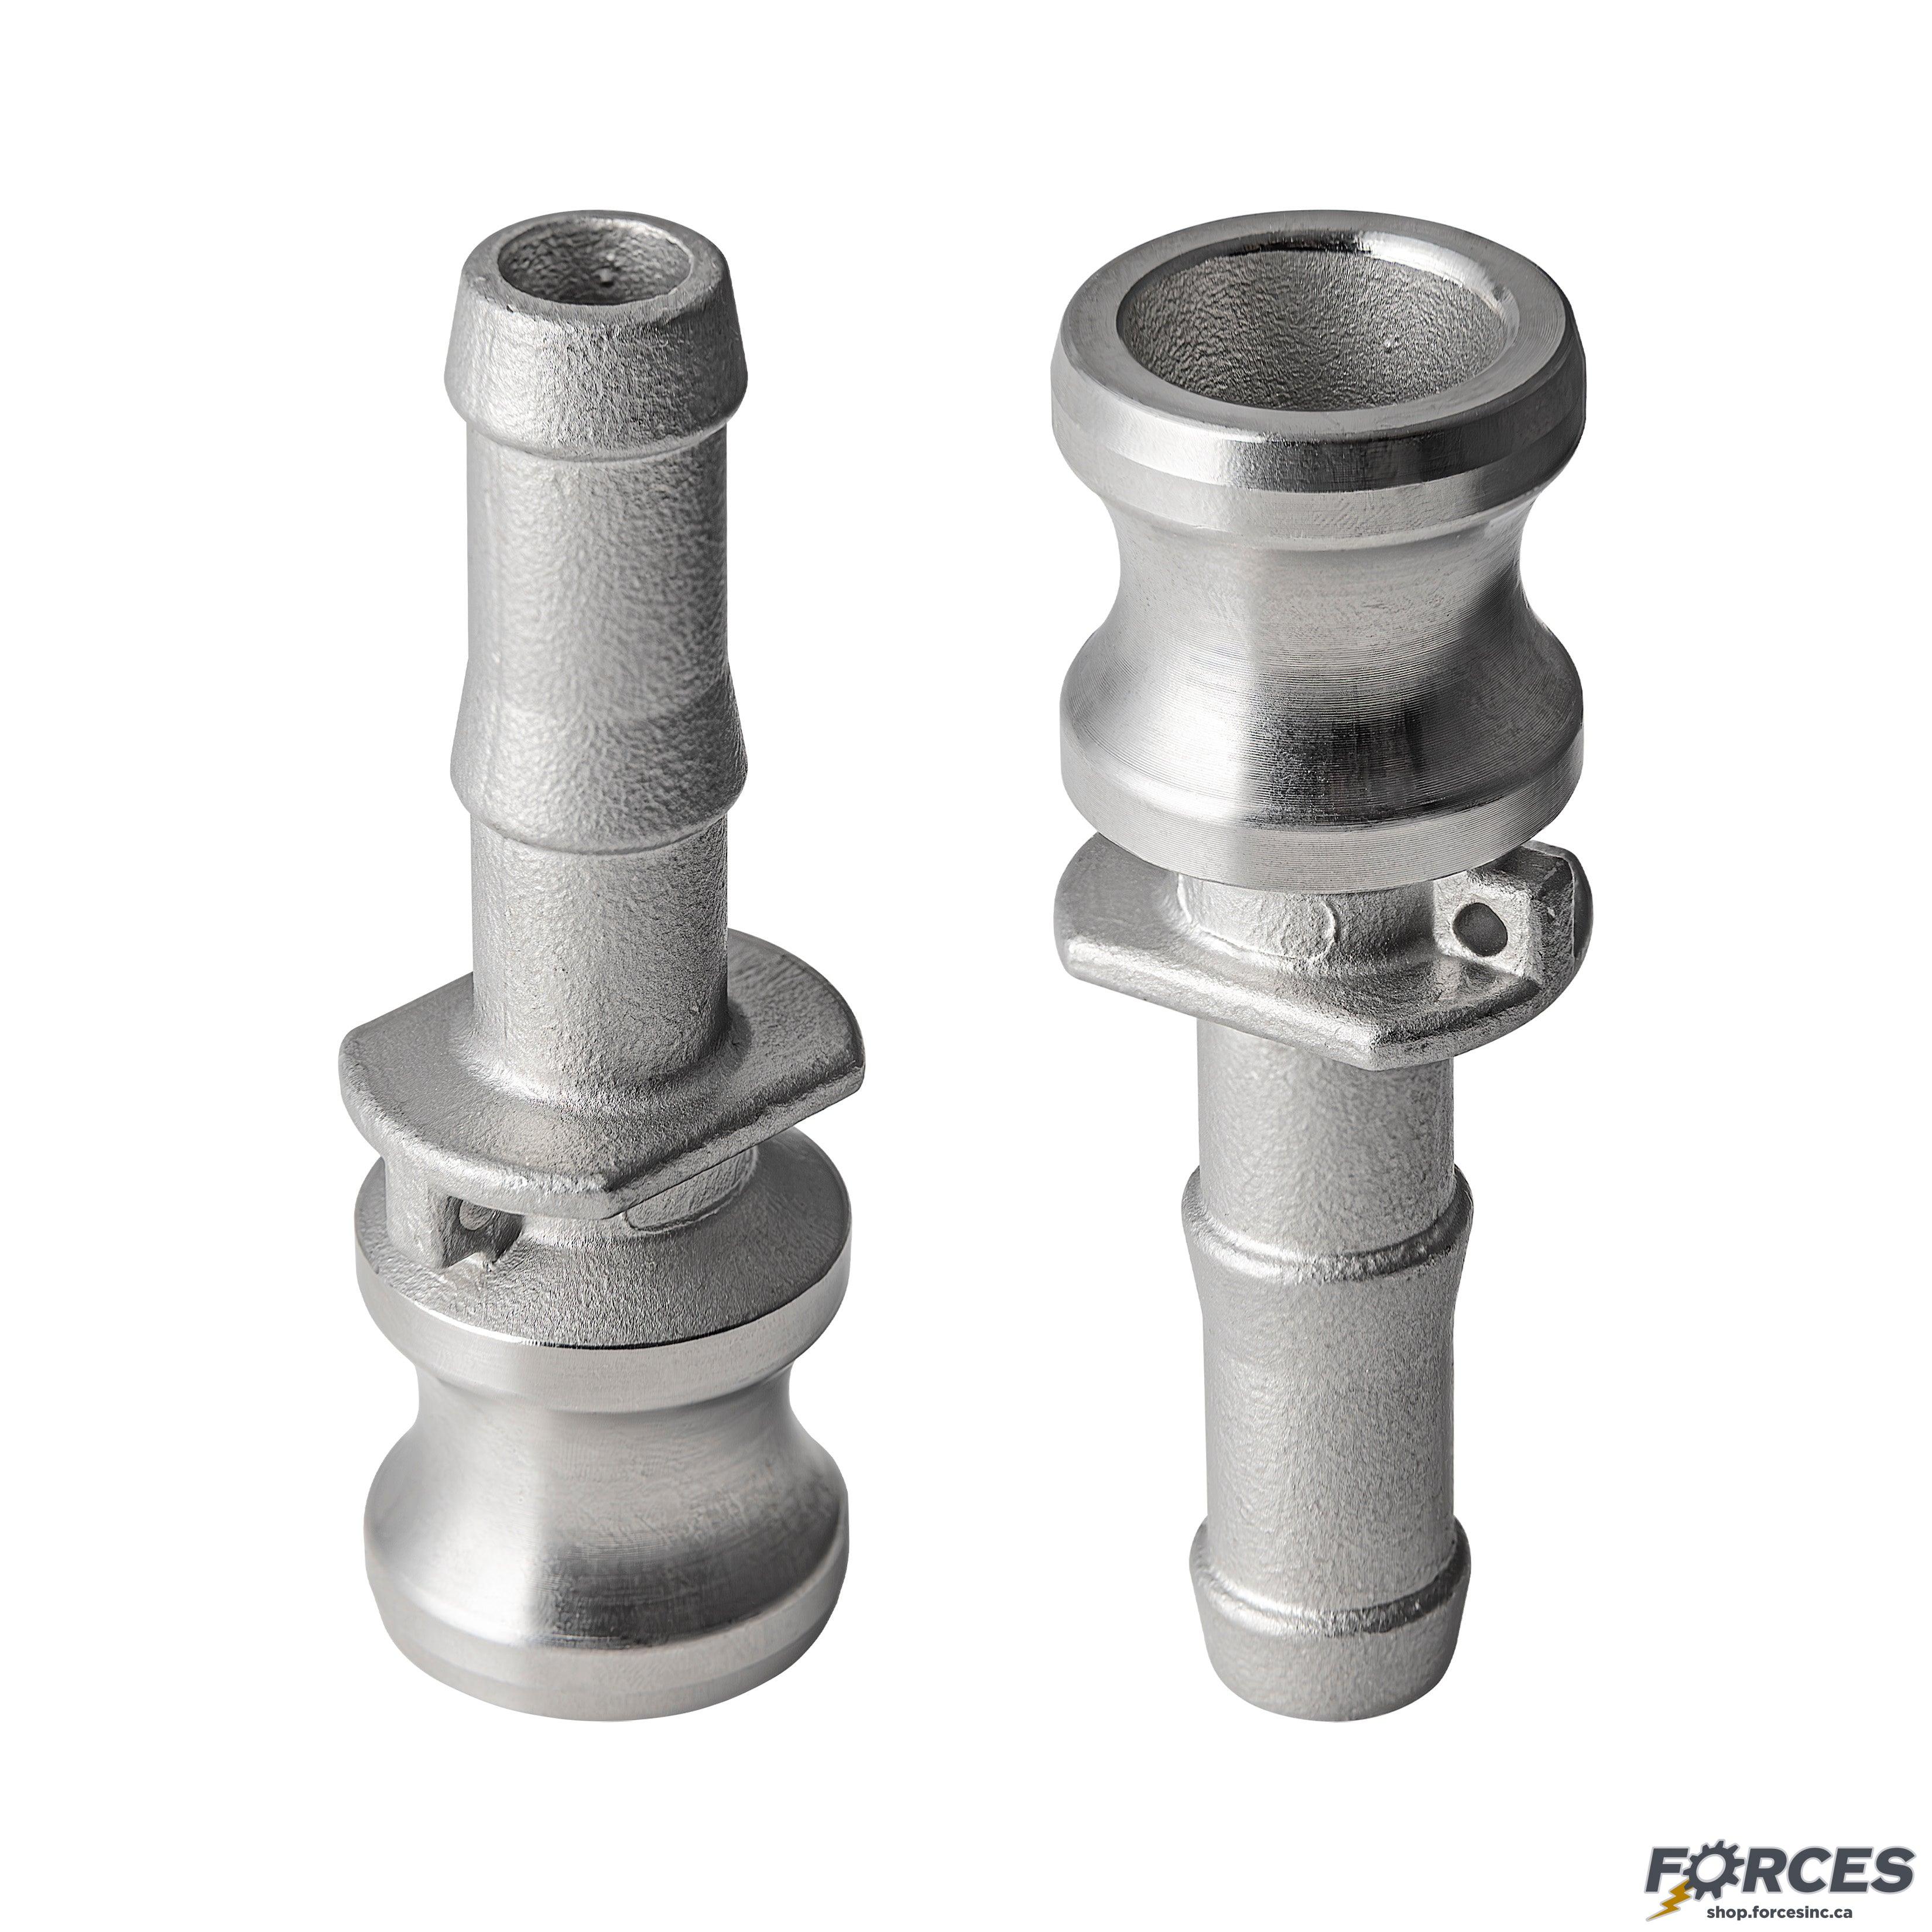 1/2" Type E Camlock Fitting Stainless Steel 316 - Forces Inc